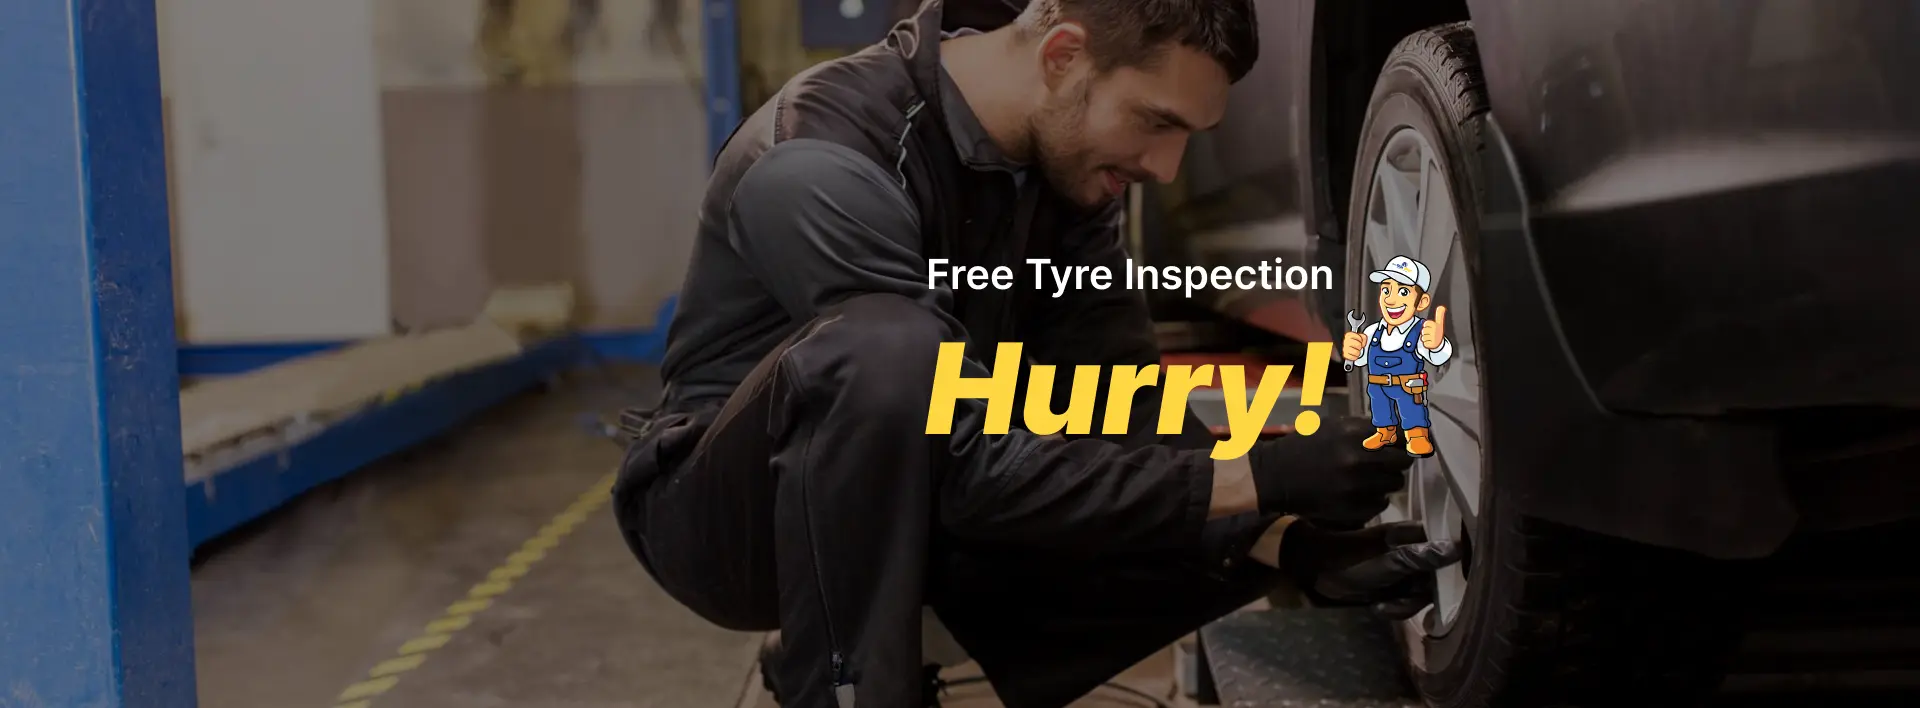 Free tyre inspection